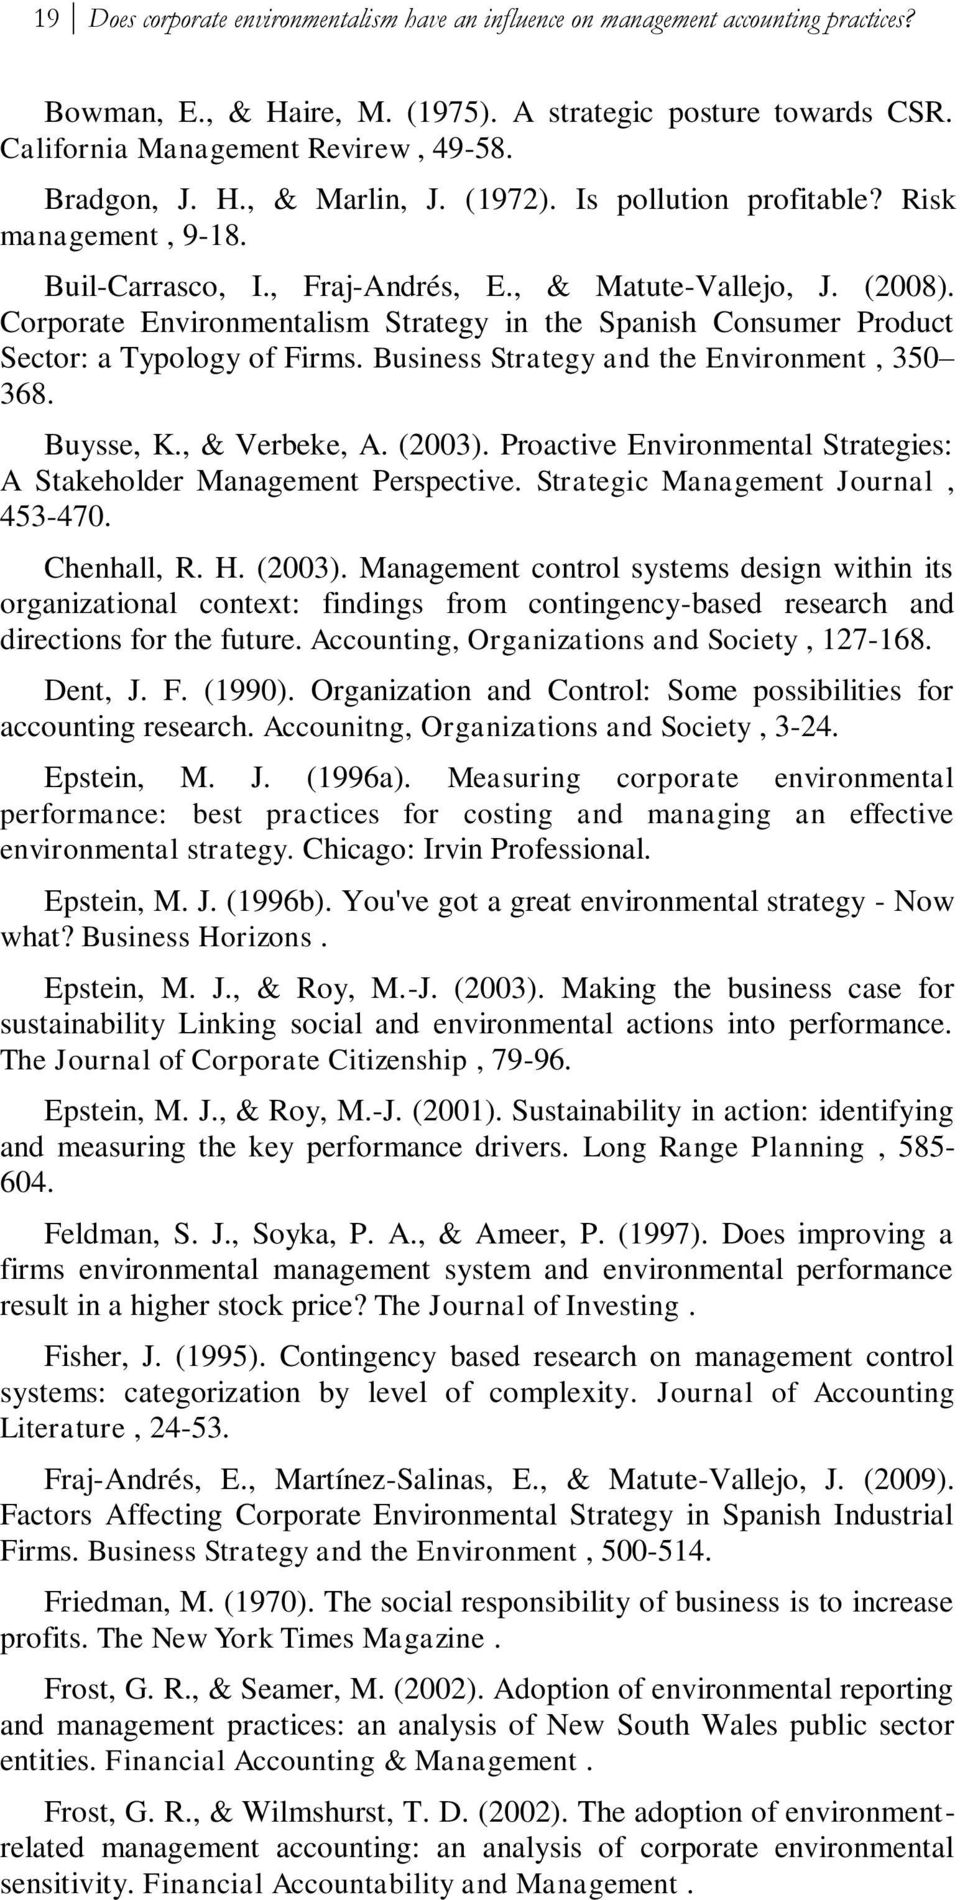 Corporate Environmentalism Strategy in the Spanish Consumer Product Sector: a Typology of Firms. Business Strategy and the Environment, 350 368. Buysse, K., & Verbeke, A. (2003).